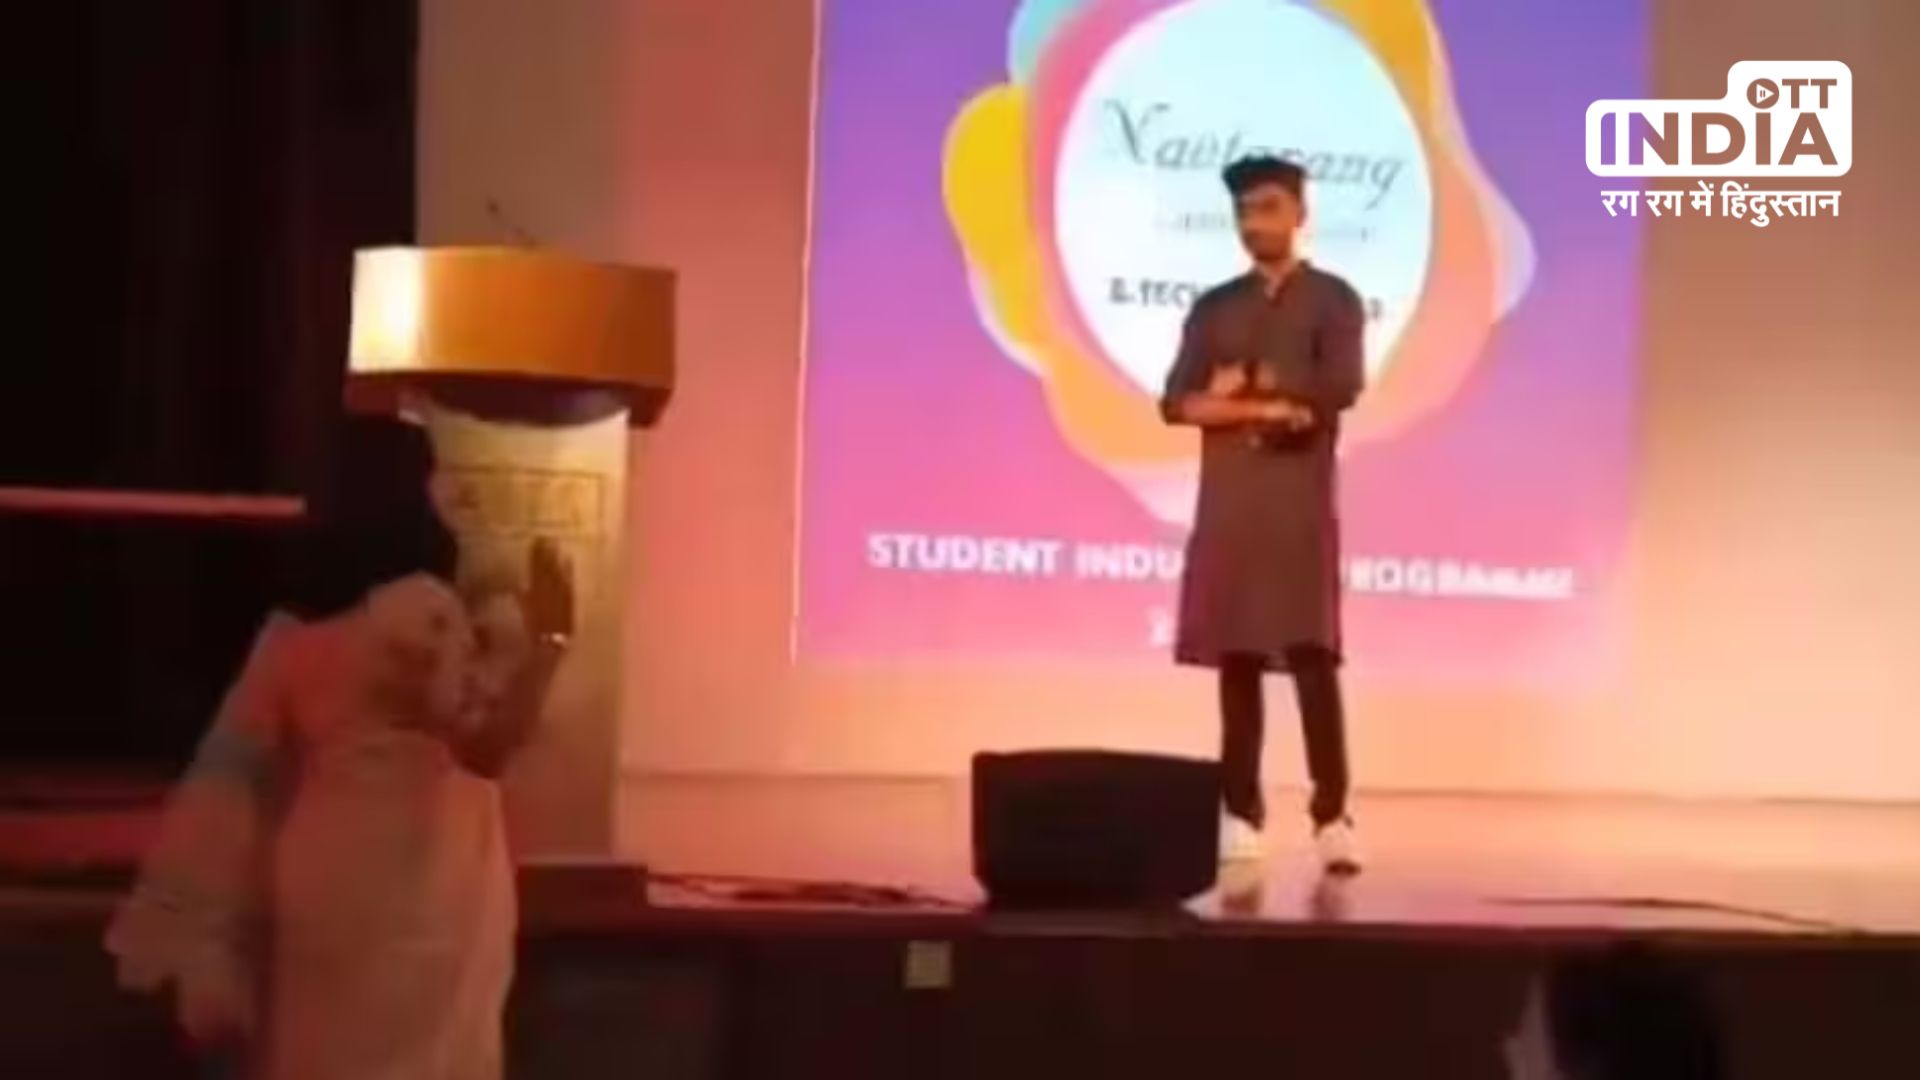 boy chant Jai Shree ram on stage professor suspended after viral video UP News